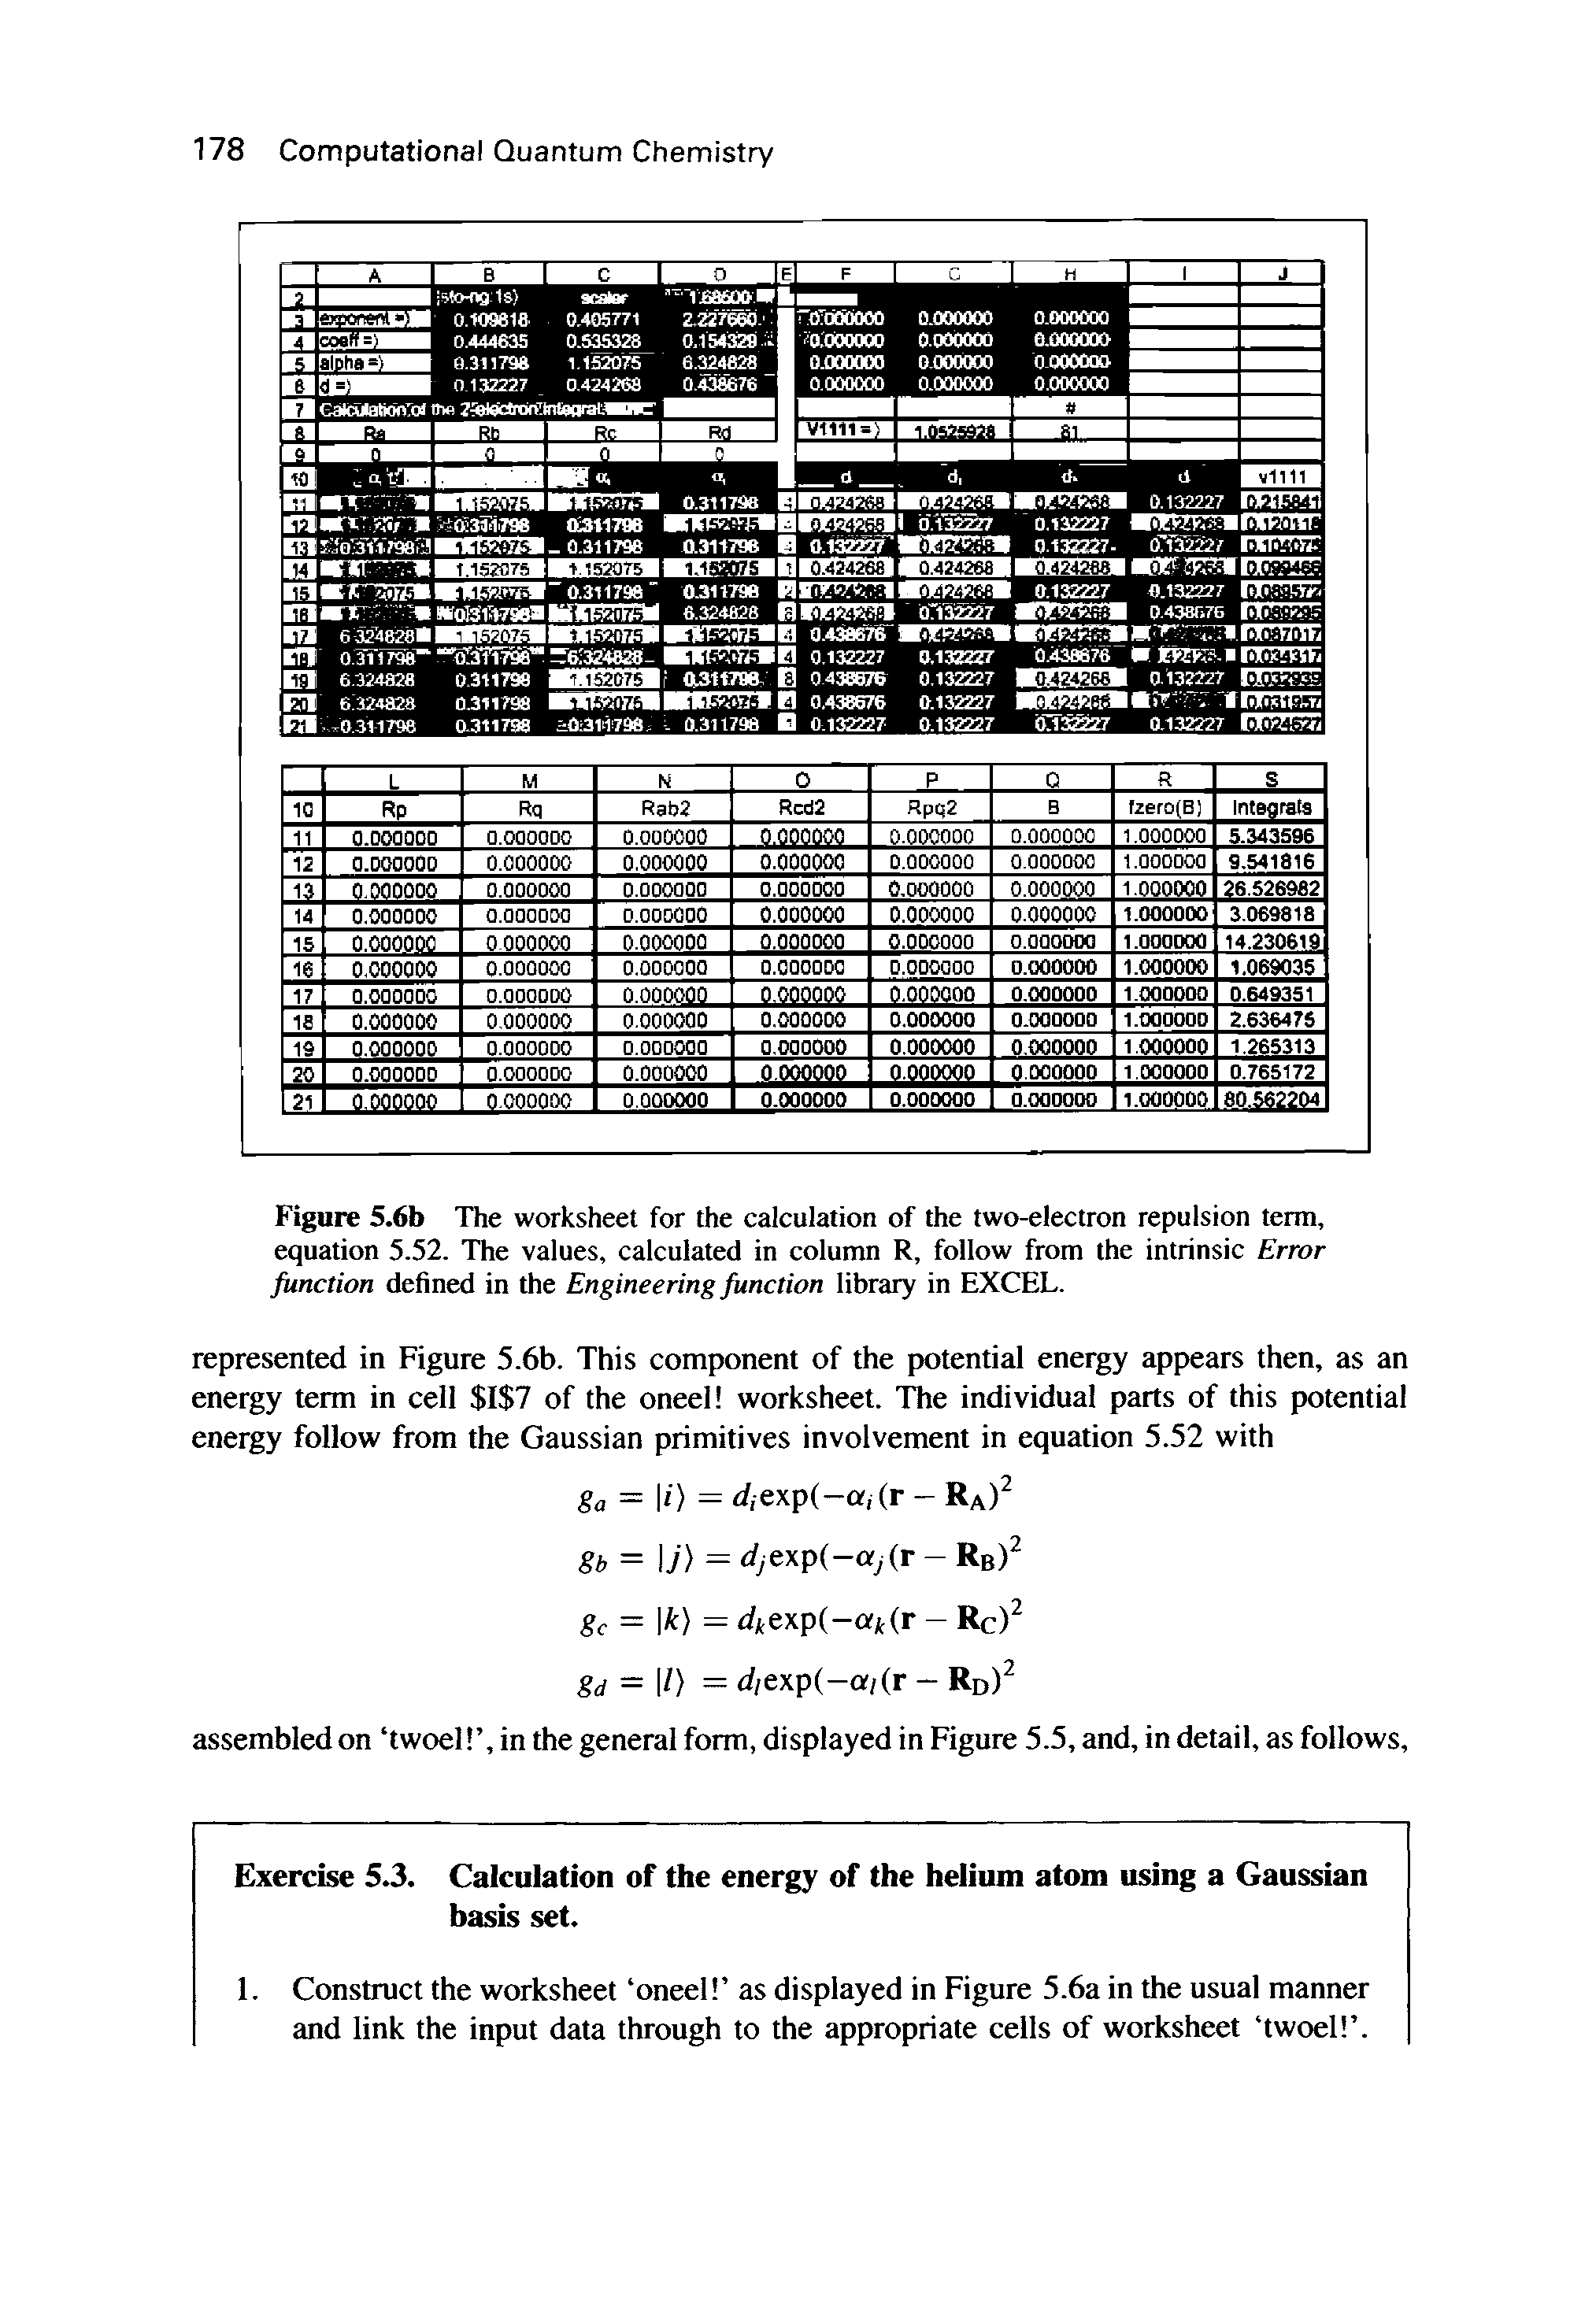 Figure 5.6b The worksheet for the calculation of the two-electron repulsion term, equation 5.52. The values, calculated in column R, follow from the intrinsic Error function defined in the Engineering function library in EXCEL.